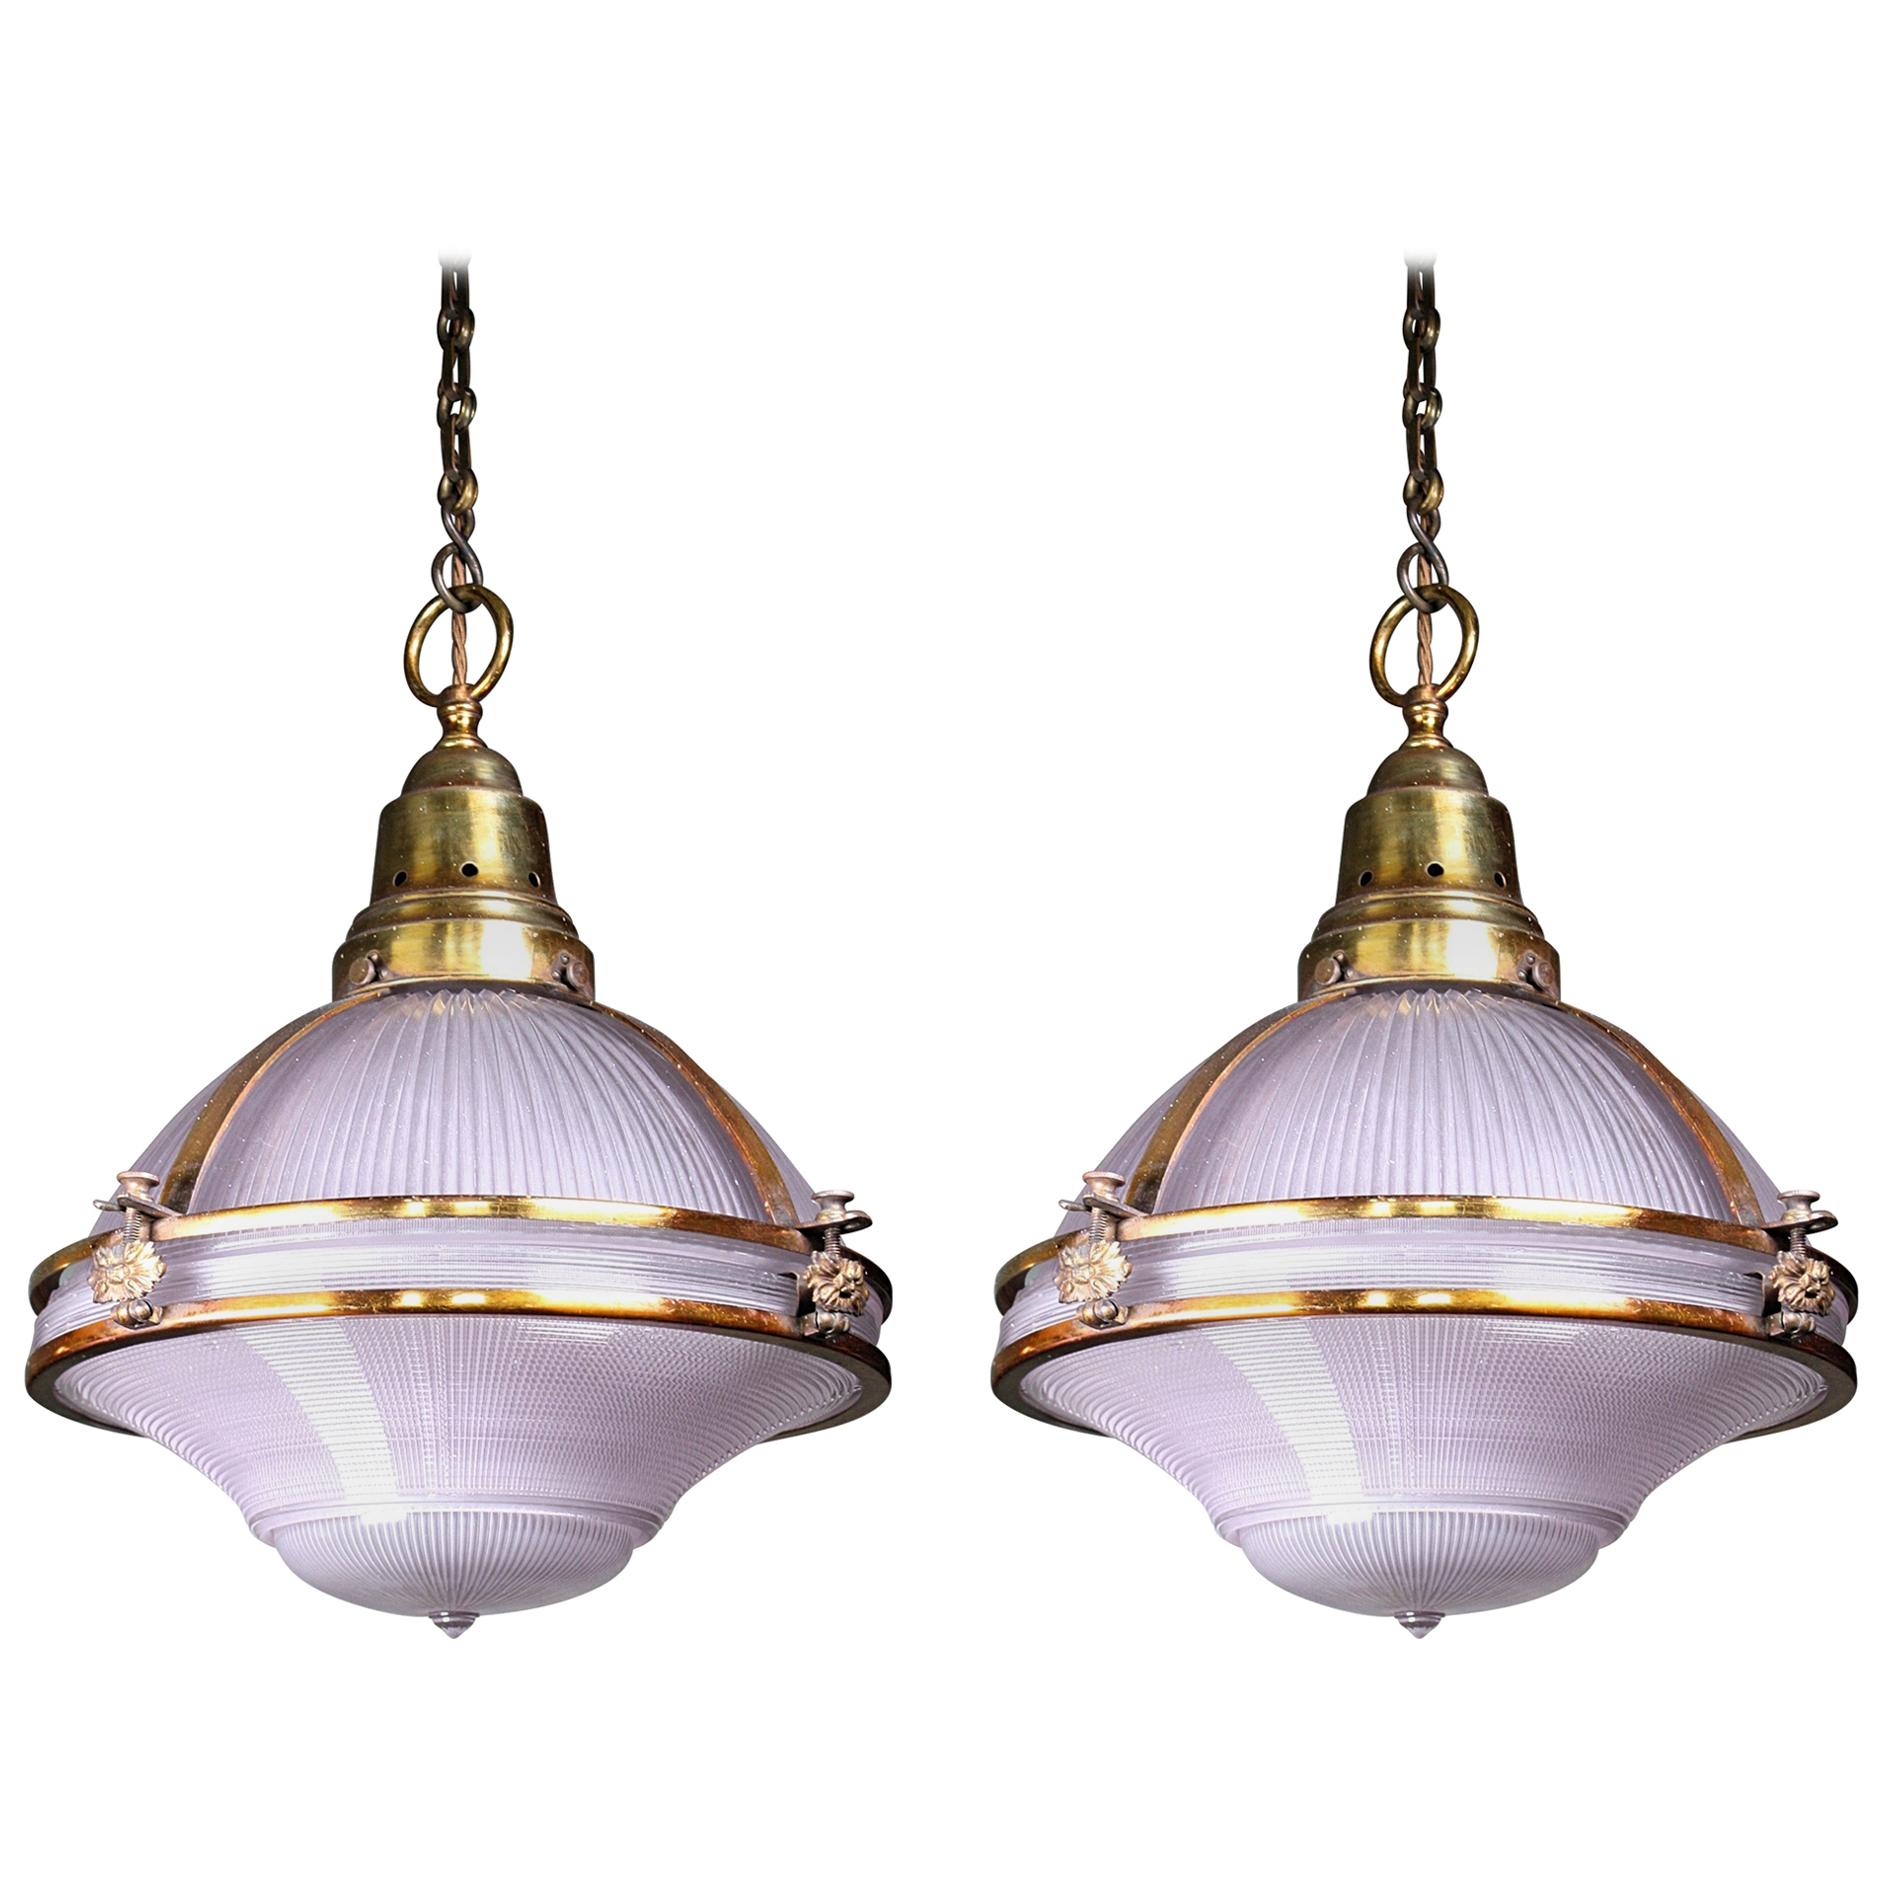 Rare Pair of Violet Tinted Holophane Gilt Copper Caged Pendants Lights